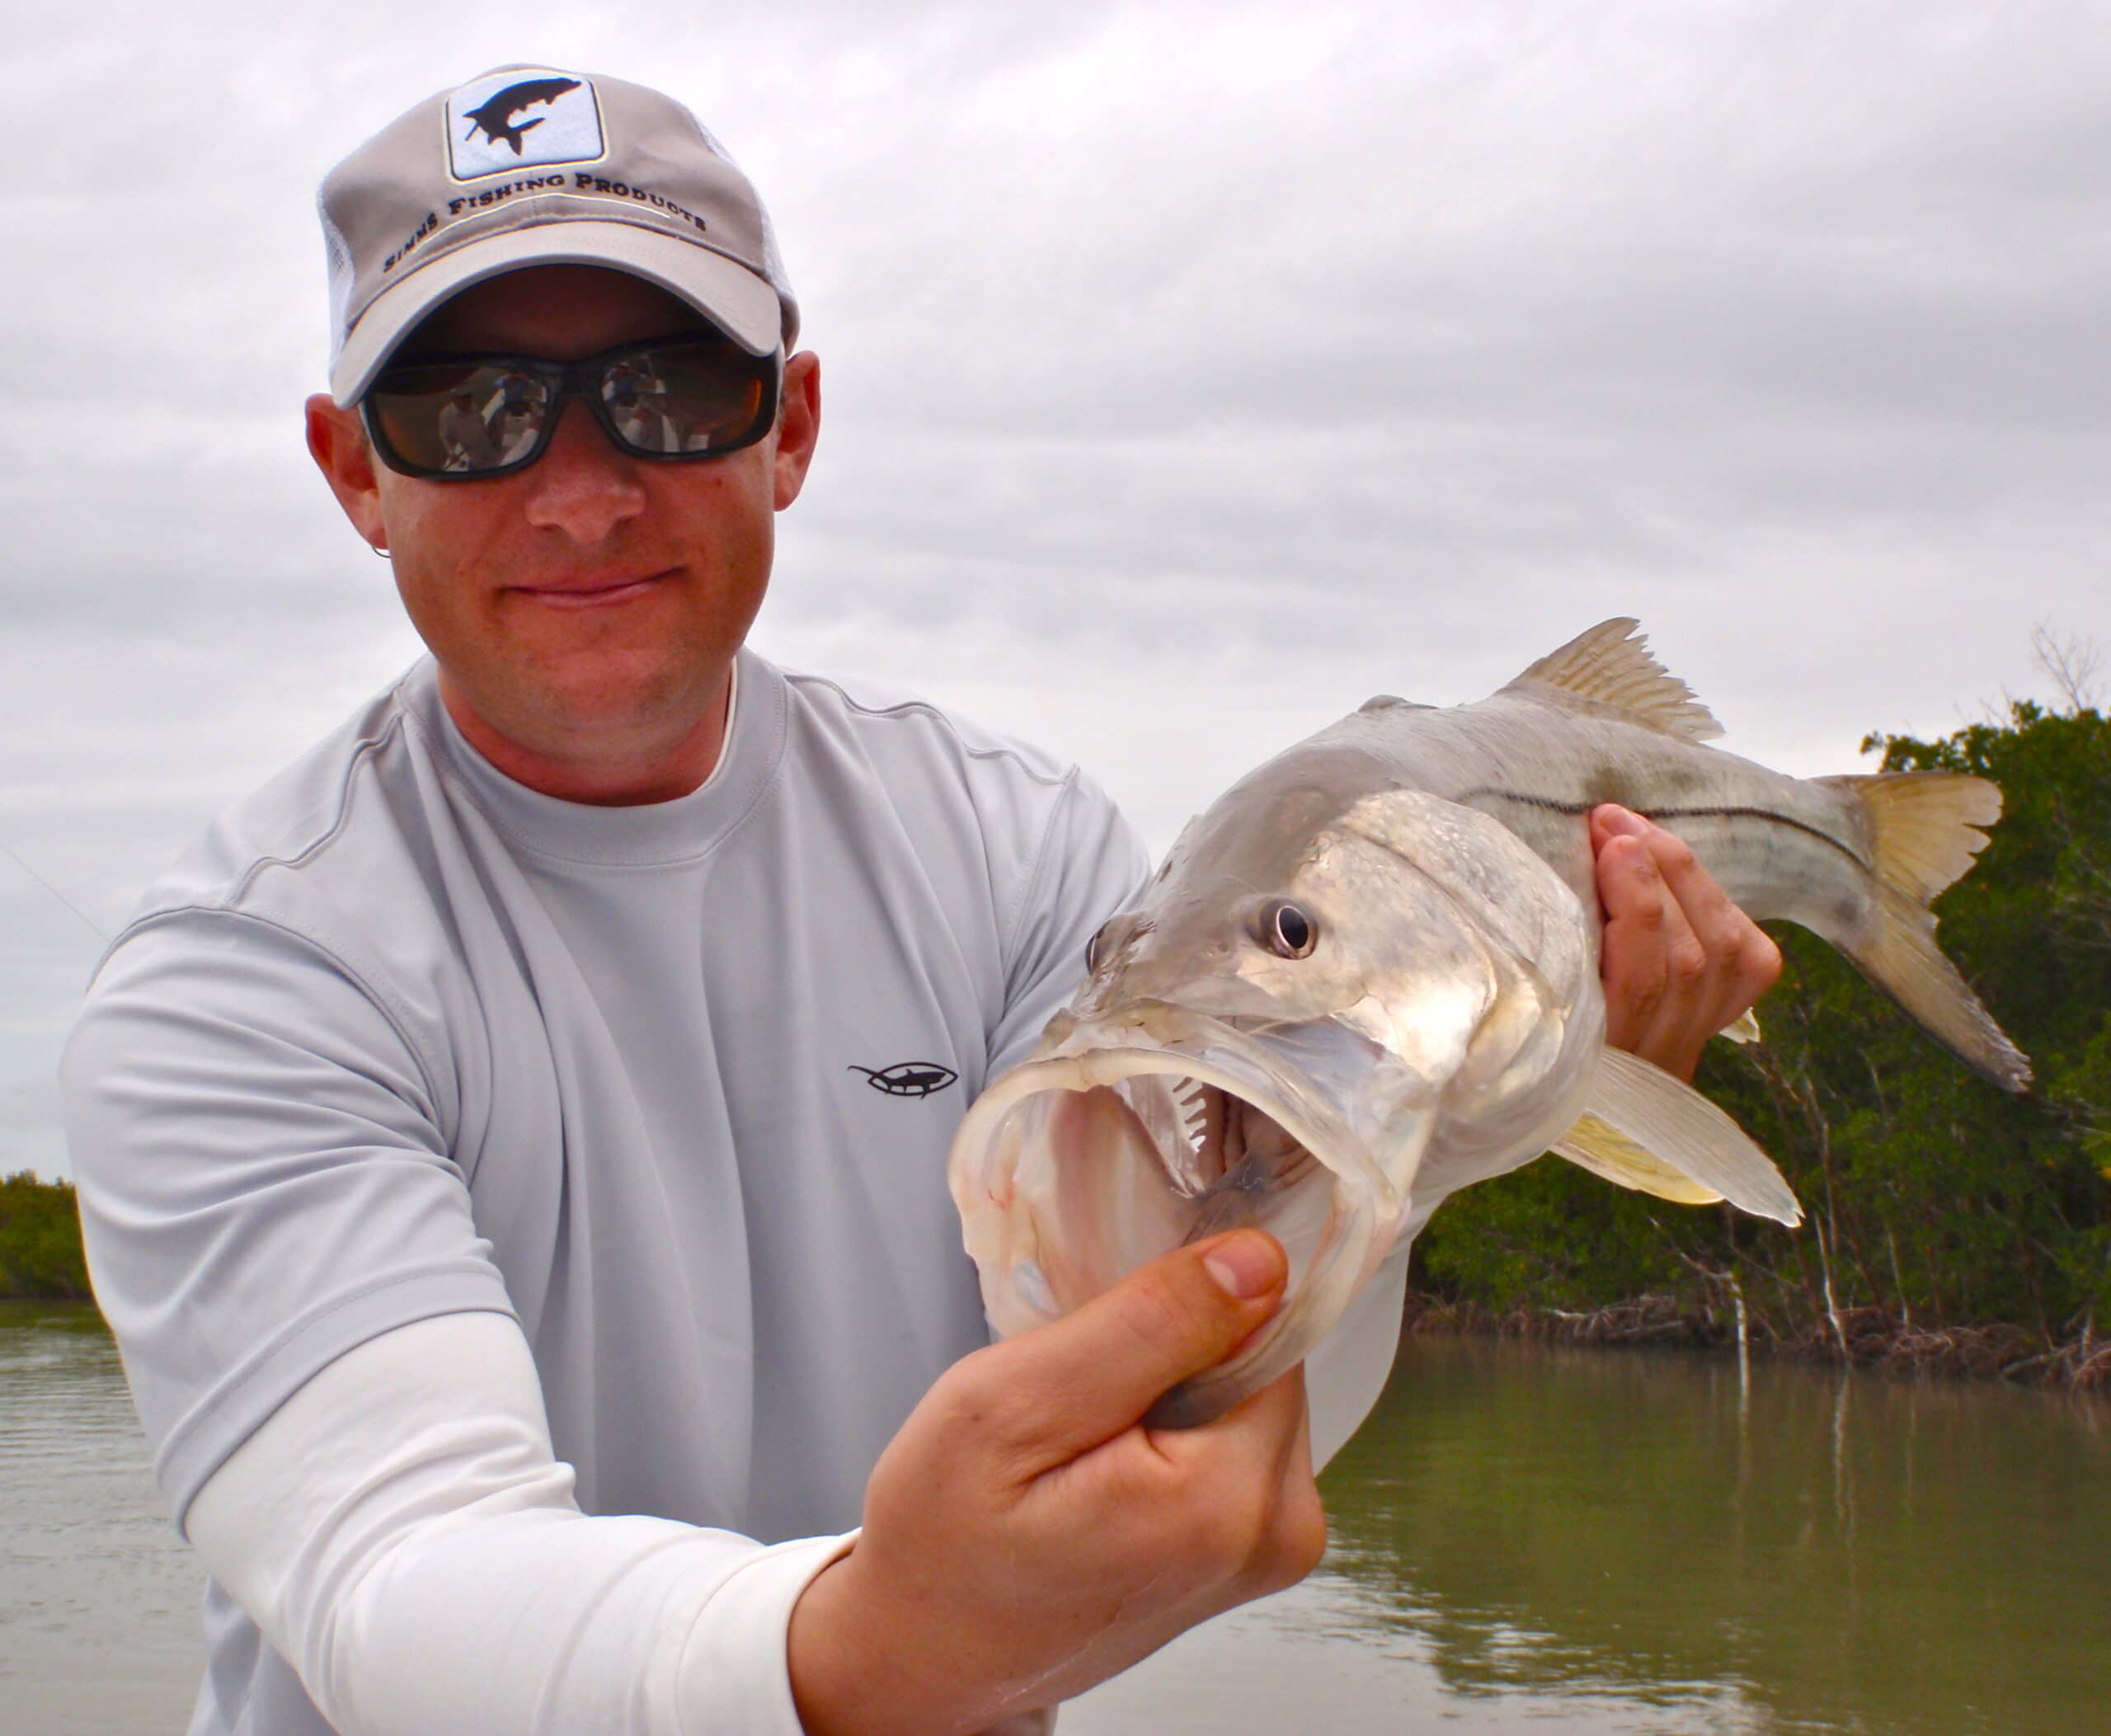 Flamingo Everglades Fishing Report|Lots Of Snook In the Glades!